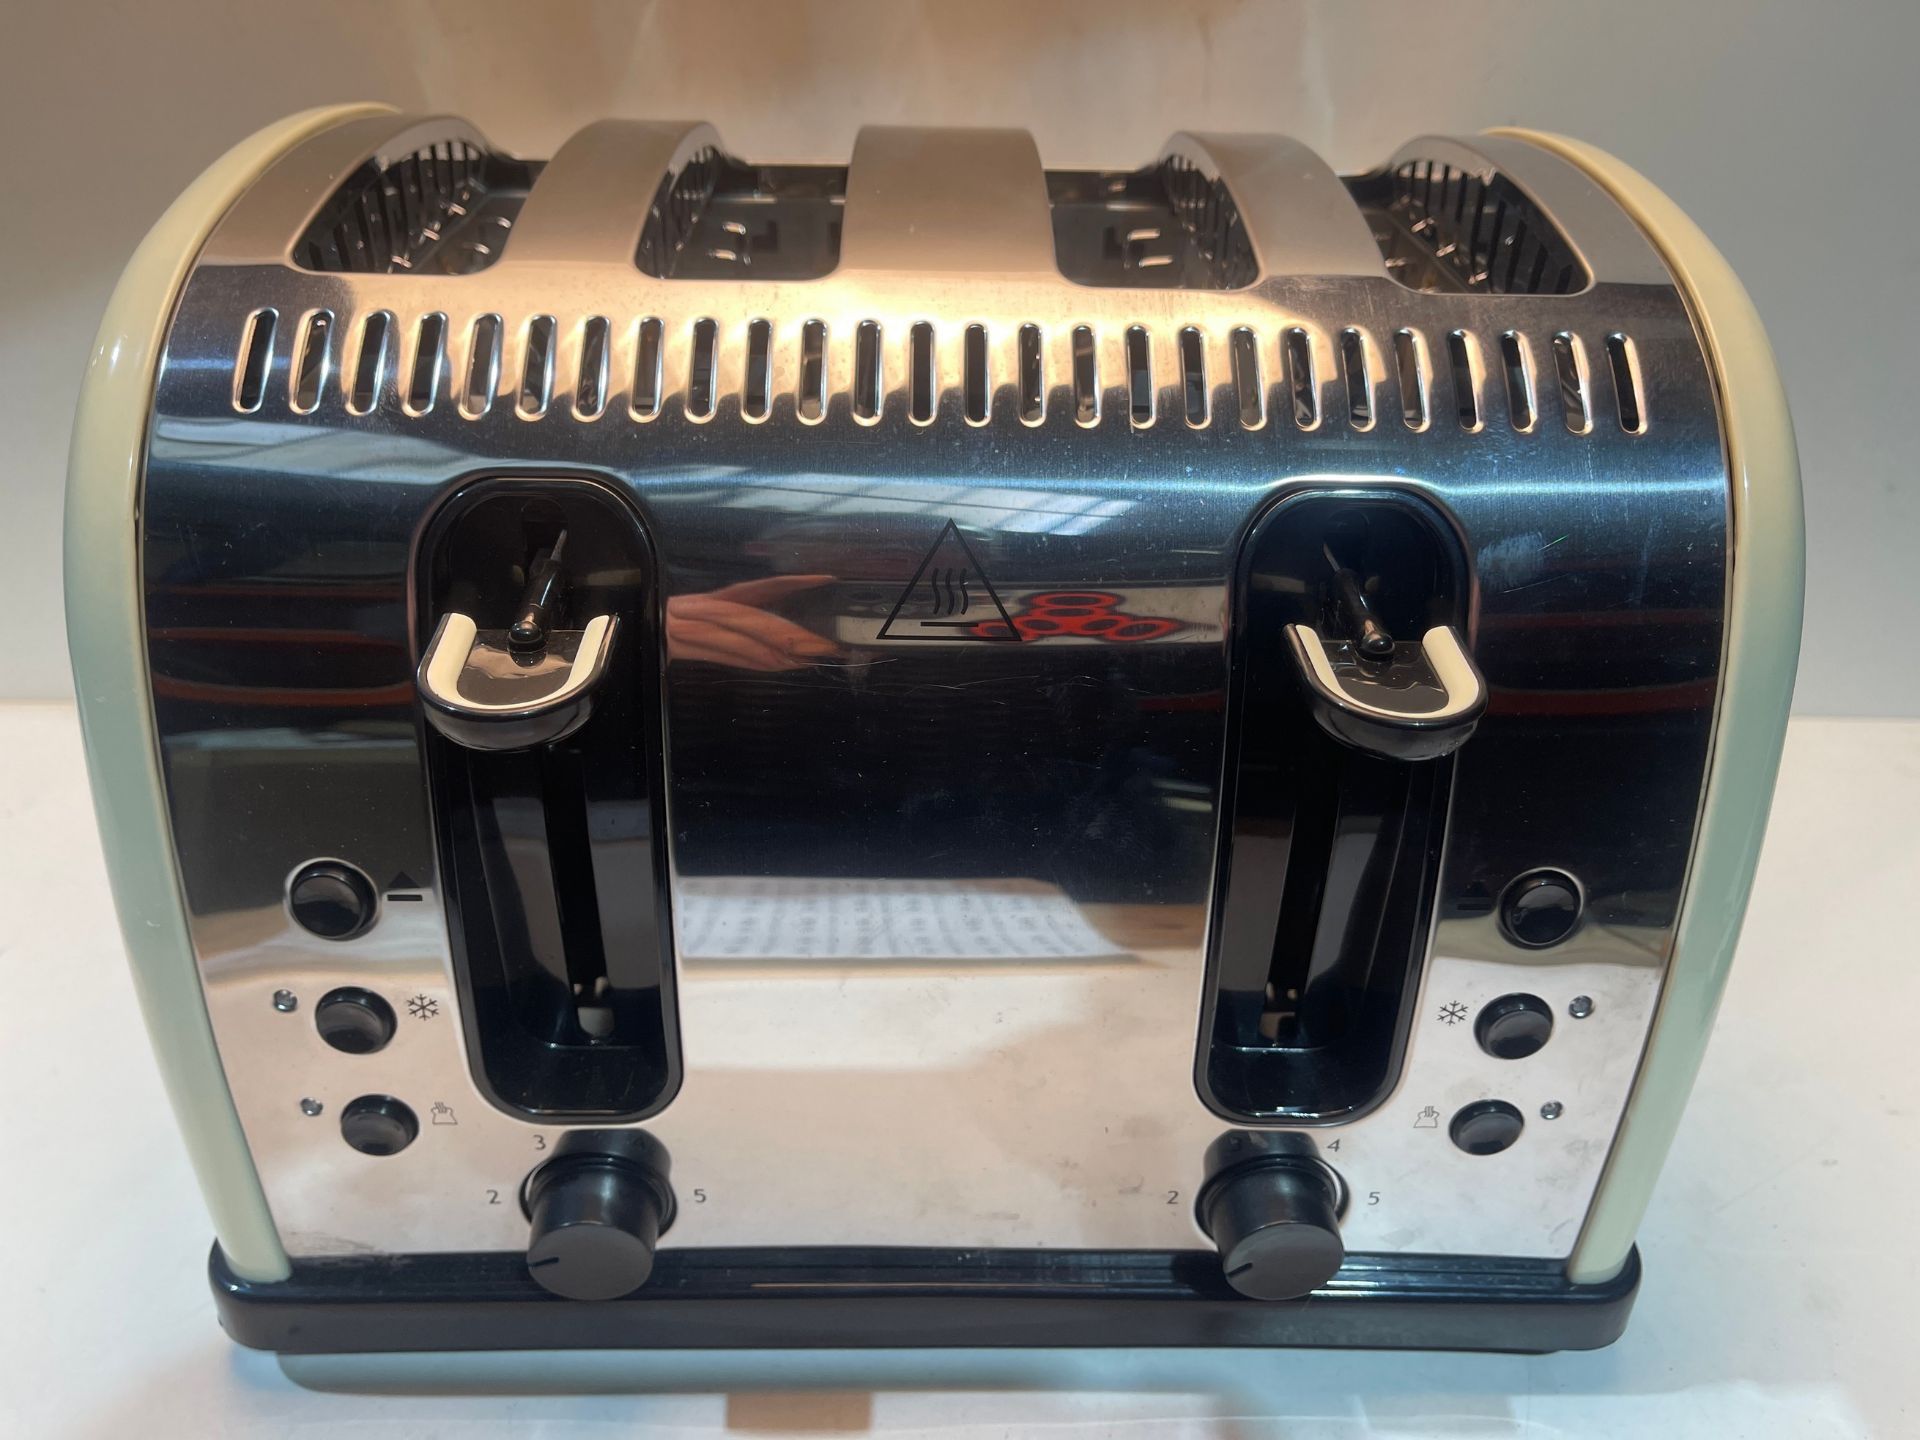 Russell Hobbs 21302 Legacy 4-Slice Toaster, Stainless Steel, 2400 W, Cream Â£33.95Condition - Image 2 of 2